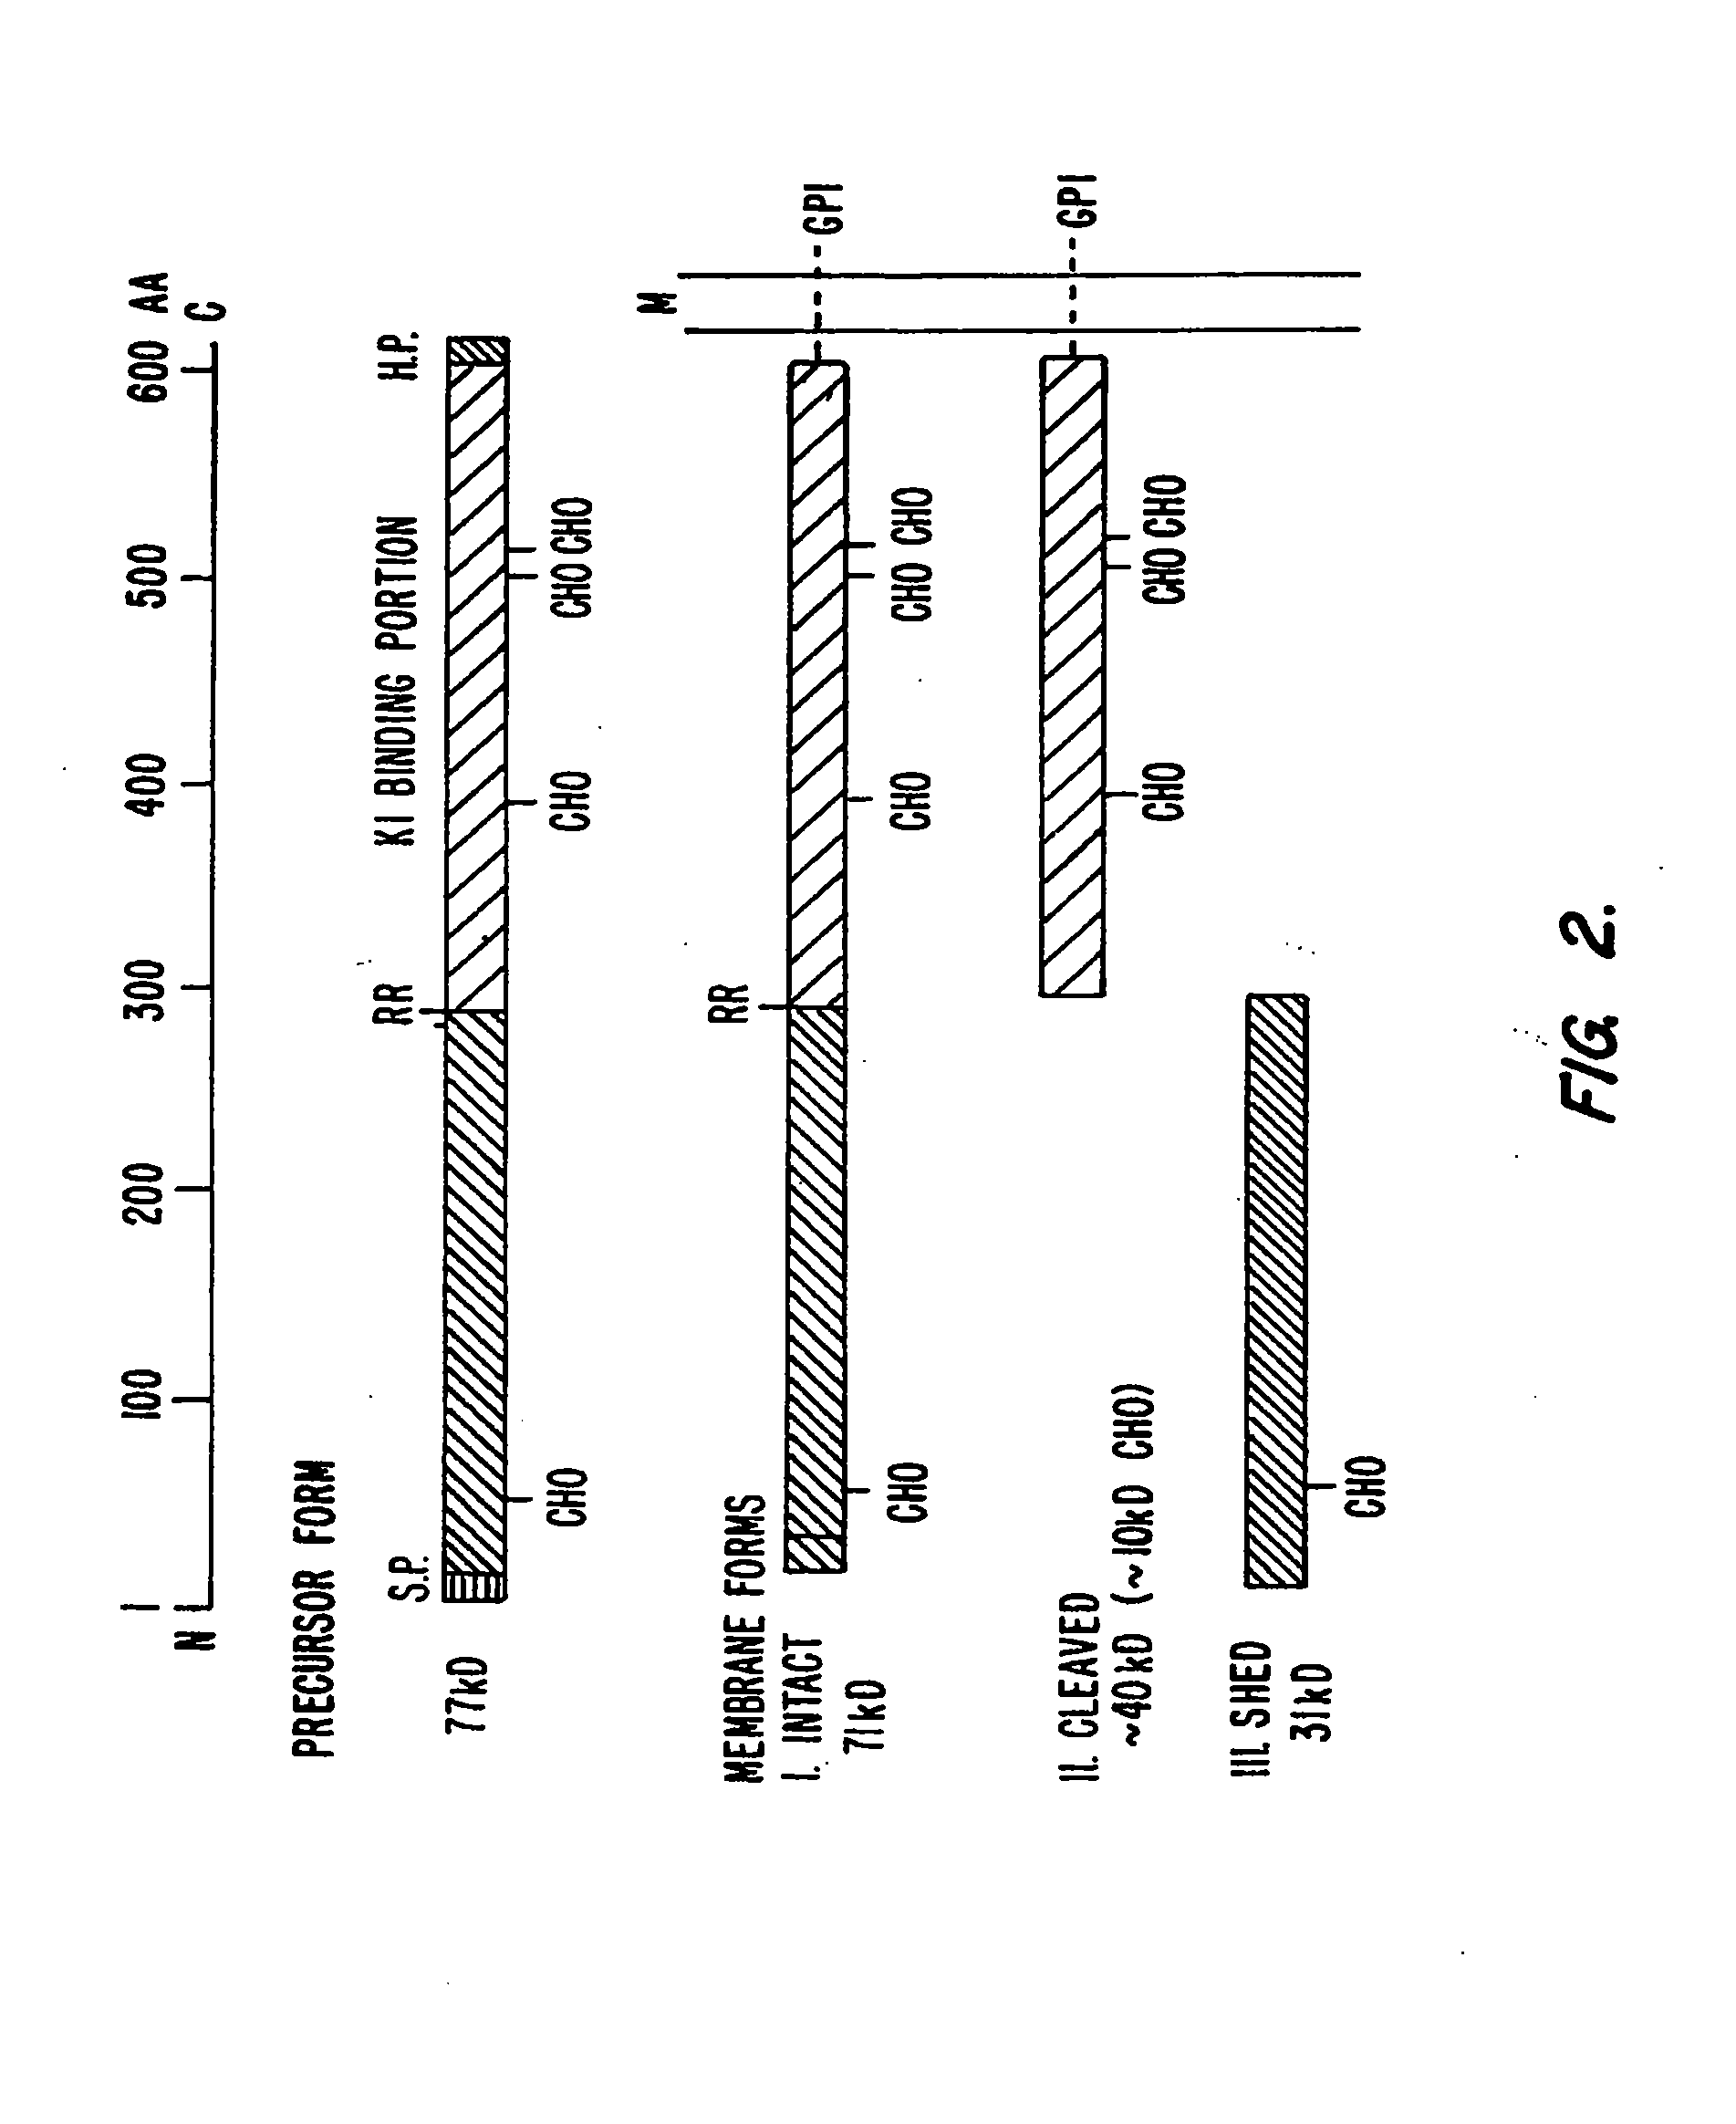 Mesothelin, A Differentiation Antigen Present On Mesothelium, Mesotheliomas, and Ovarian Cancers and Methods and Kits for Targeting the Antigen